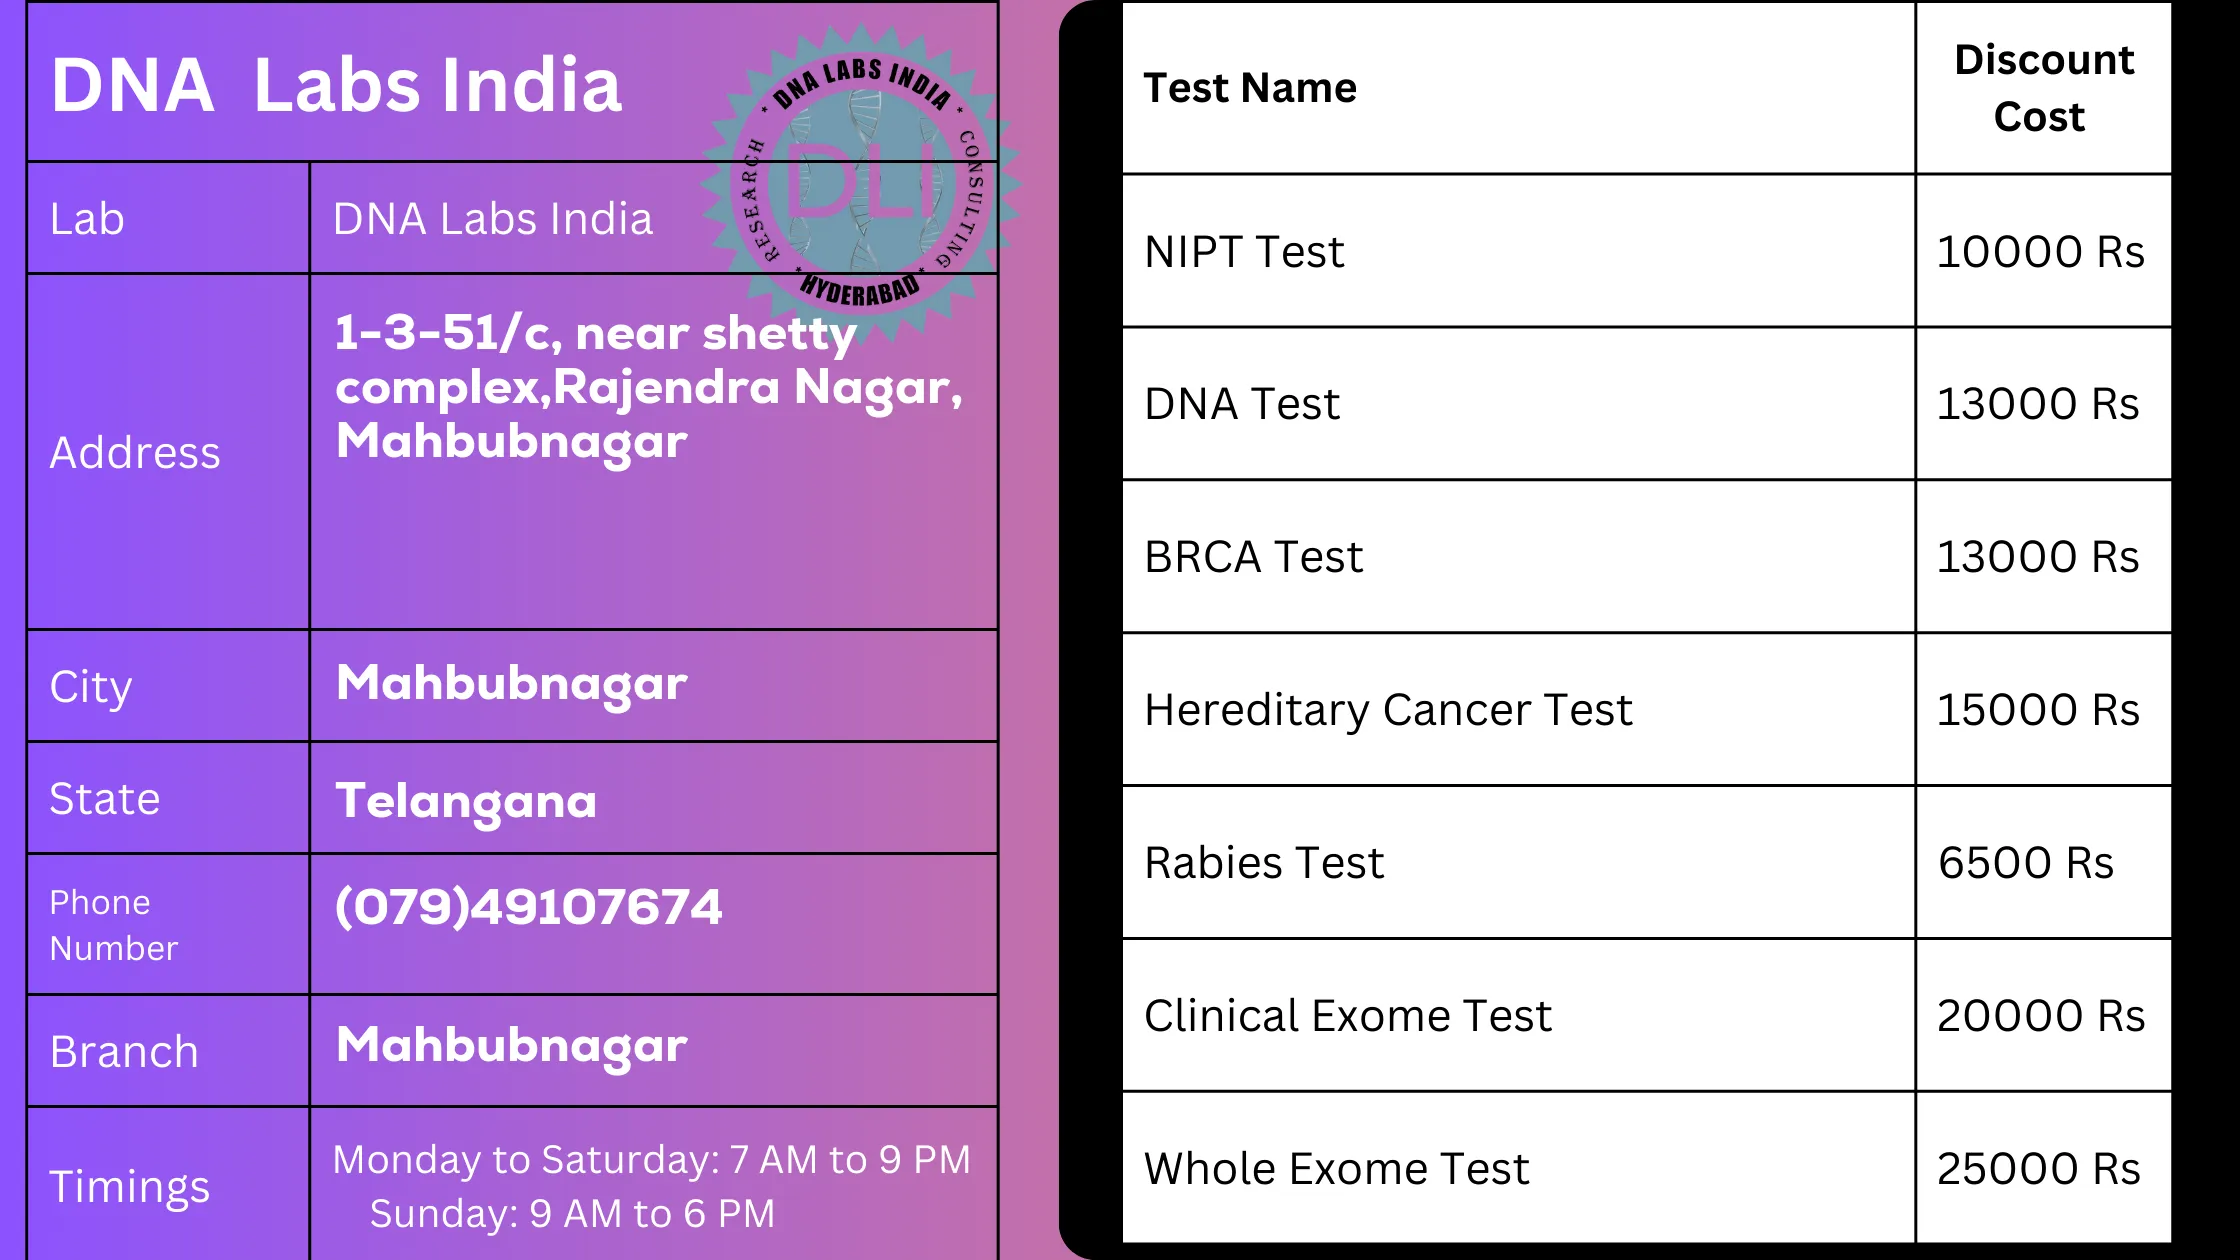 DNA Labs India in Mahbubnagar - Offering 20% Discount on Tests